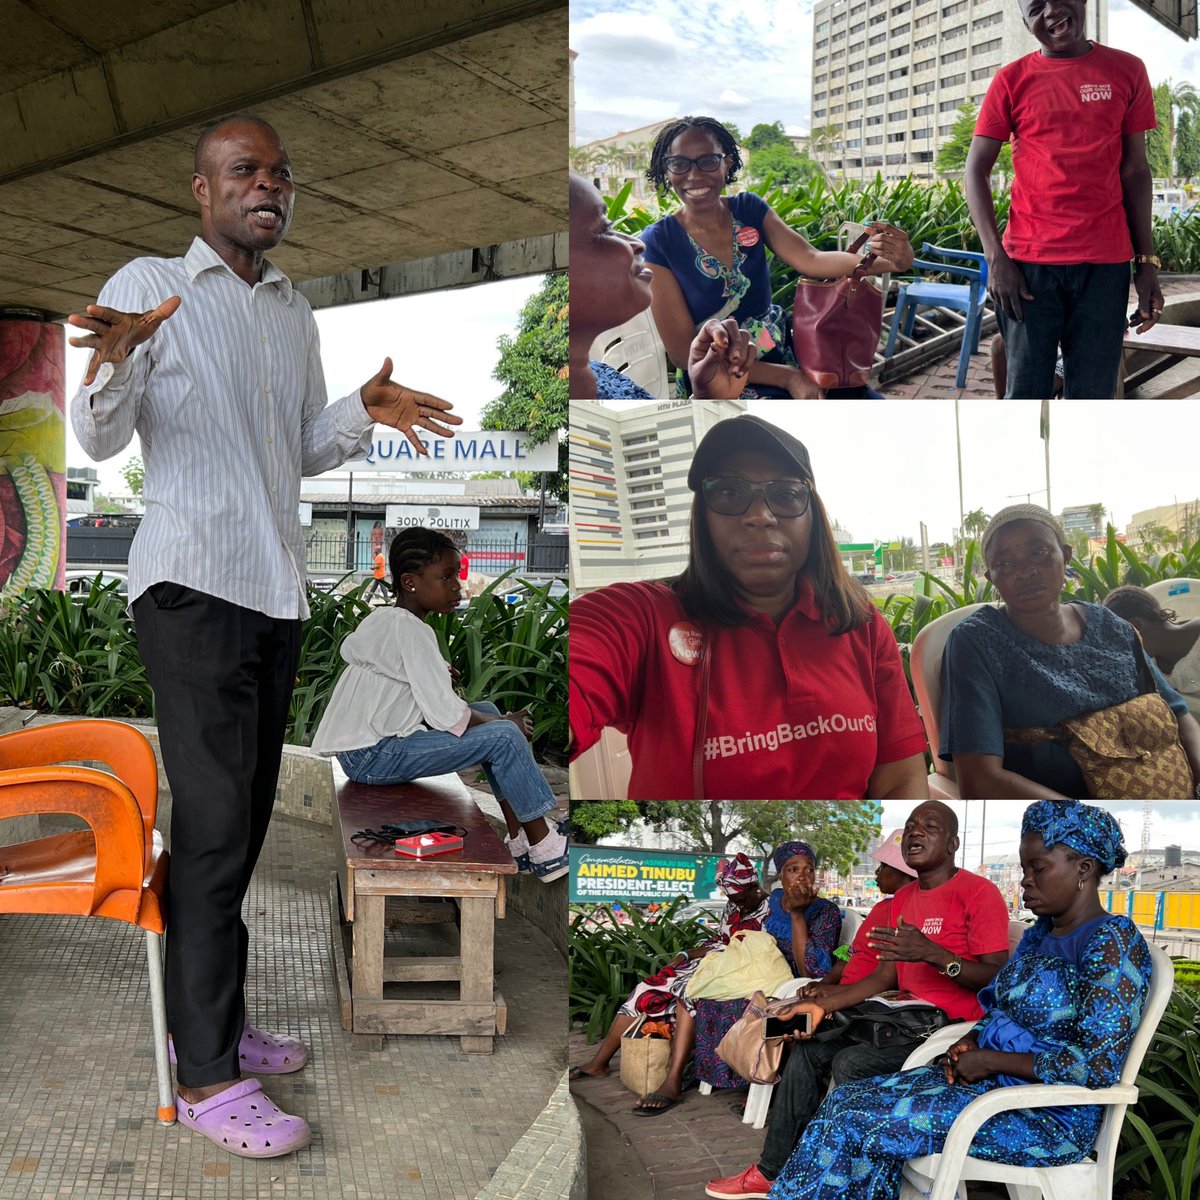 #BBOG Monday of @Cemepia_africa expressing confidence that the president-elect will bring our girls back. @naijama responded that @MBuhari still has time to rescue them before May29 handover. #HopeEndures #9years2long @EiENigeria